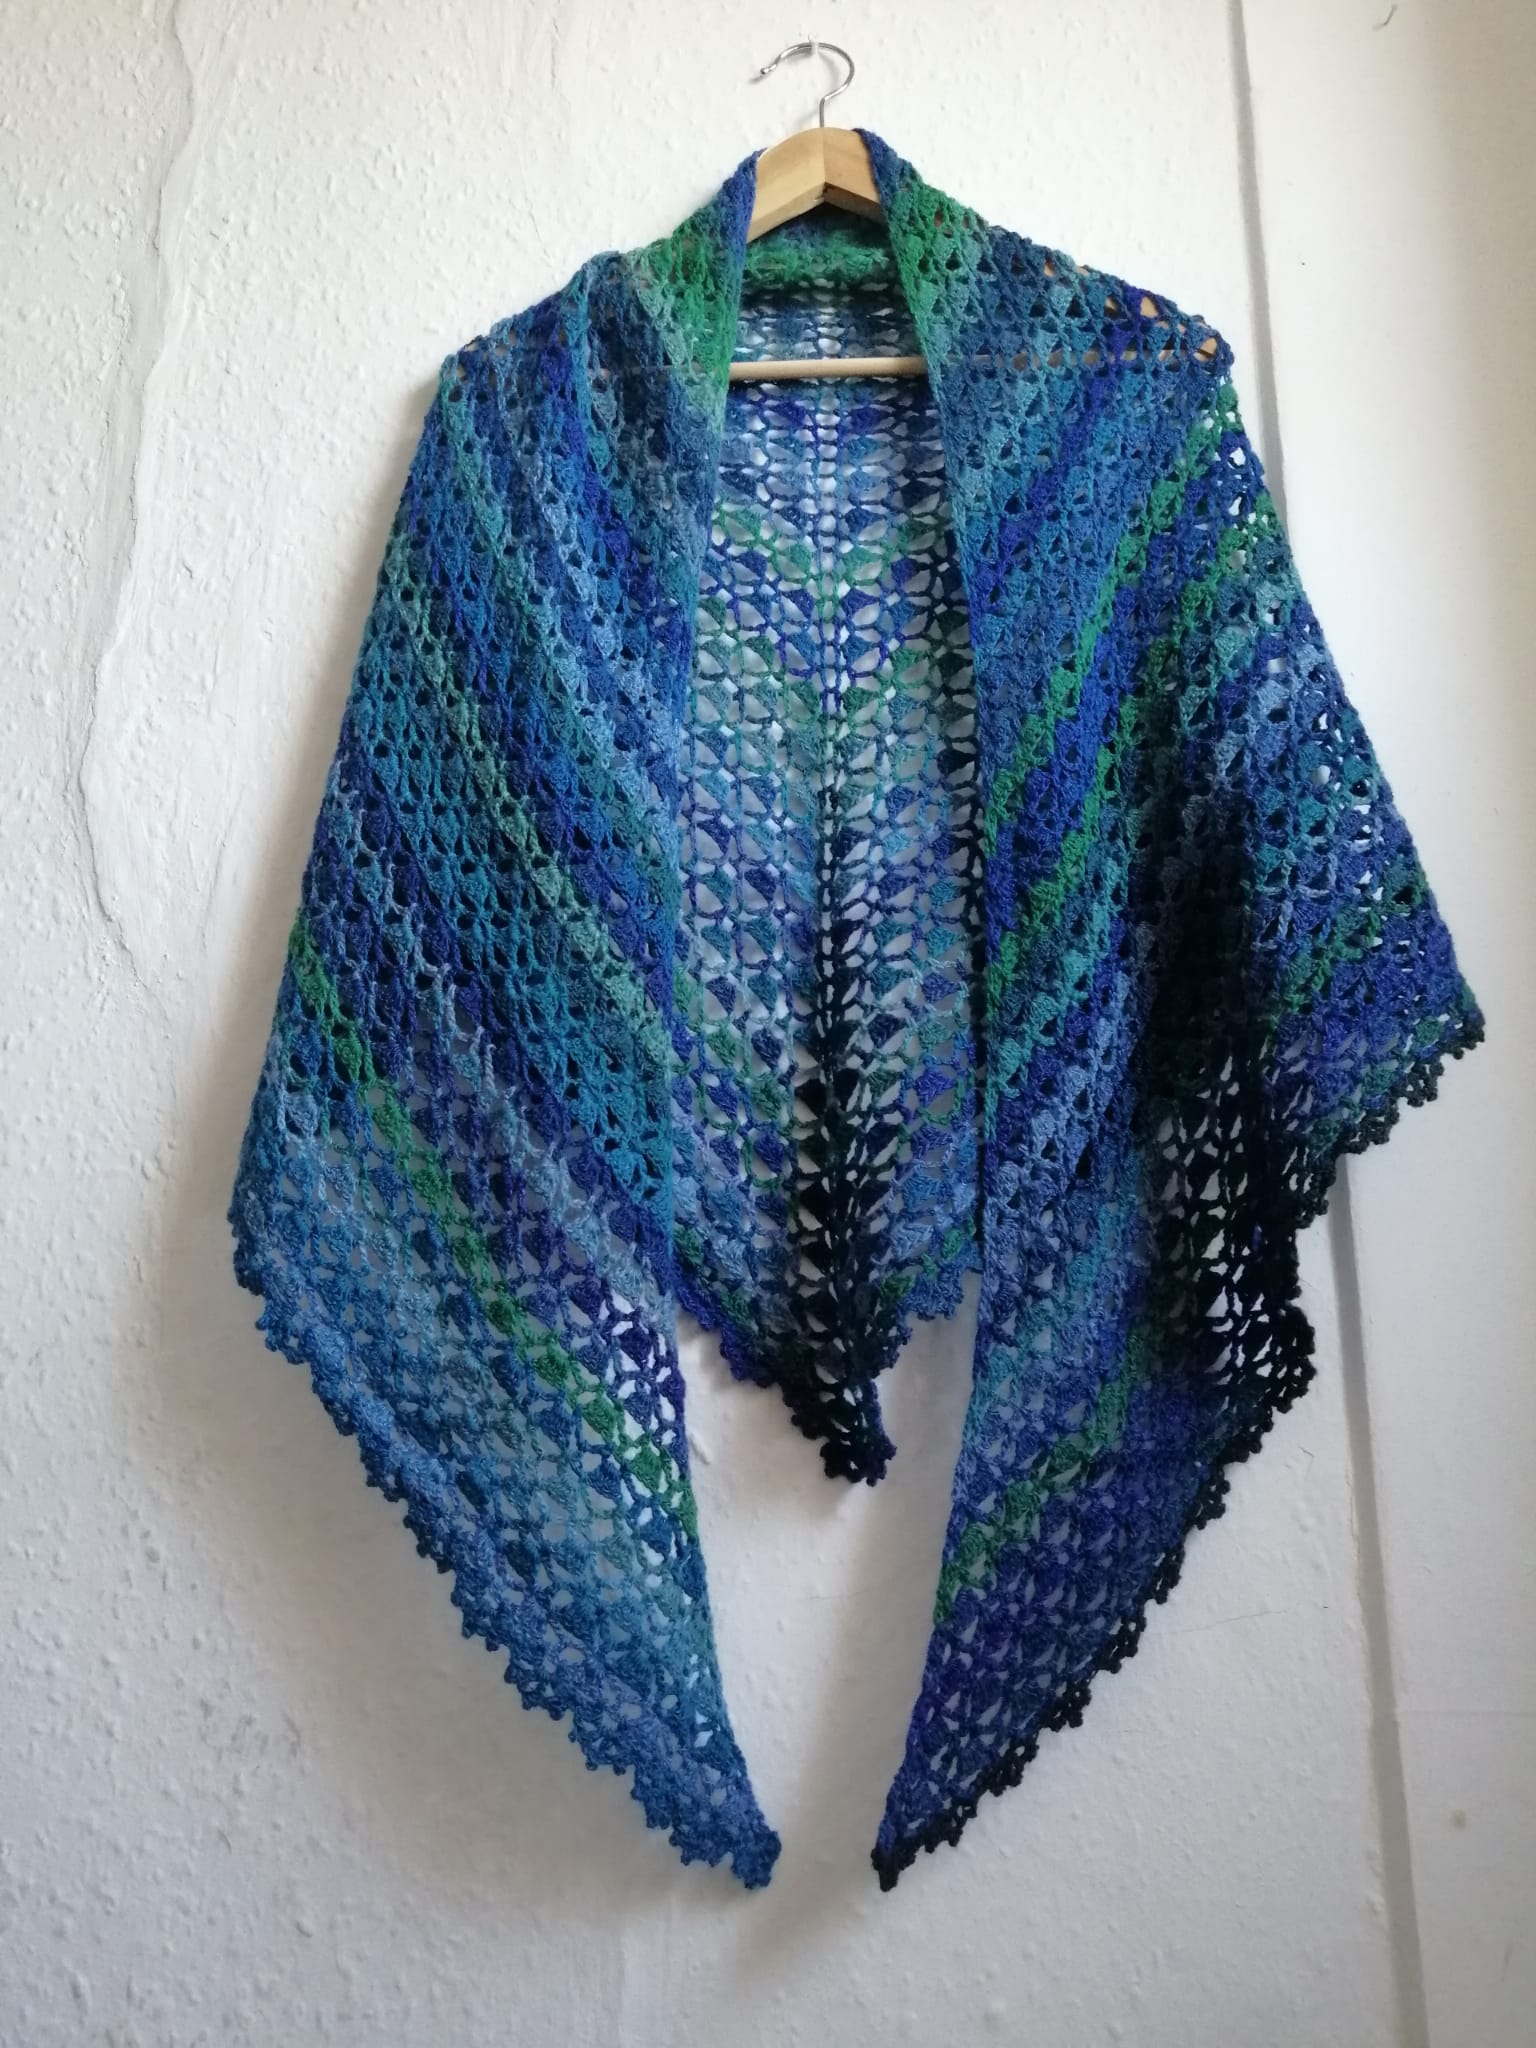 A unique, handcrafted, lacy shawl called 'Blue Geode Crochet Shawl' in blues and greens. This shawl is available for delivery in the UK.